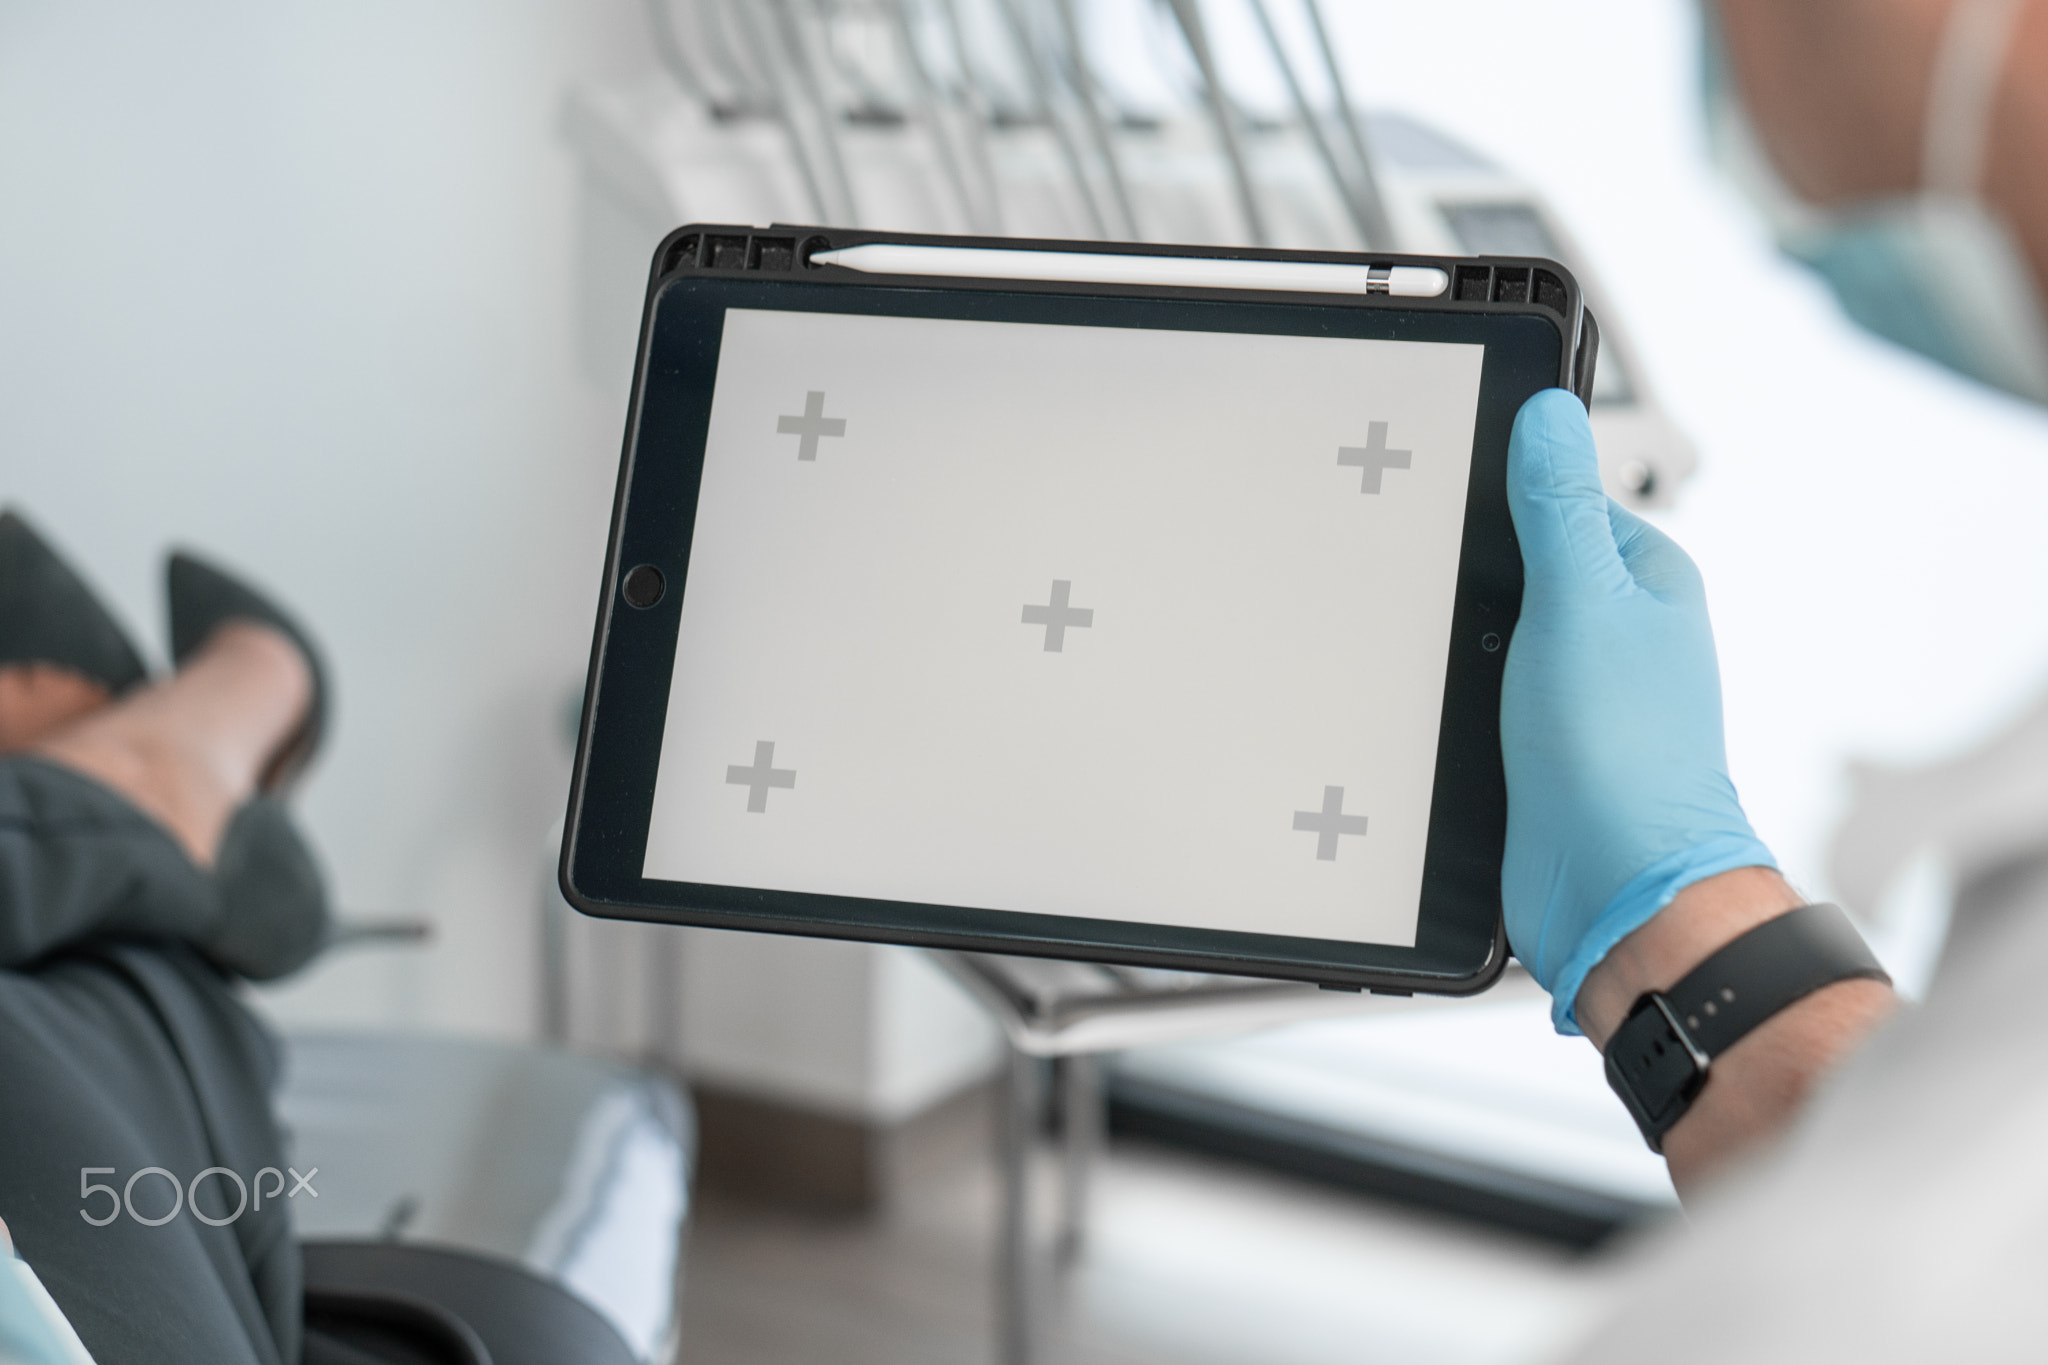 With the help tablet, dentist provides the patient with detailed information and illustrations for a